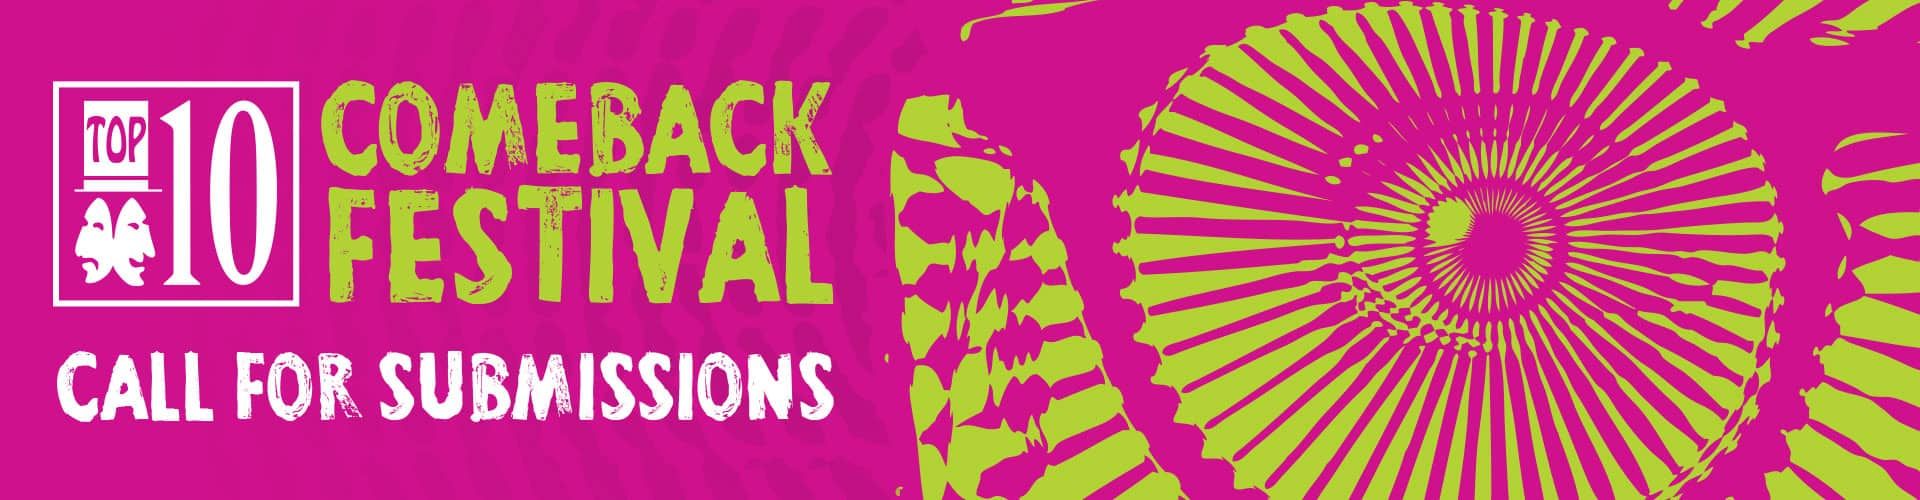 TOP 10 Comeback Festival Call For Submissions